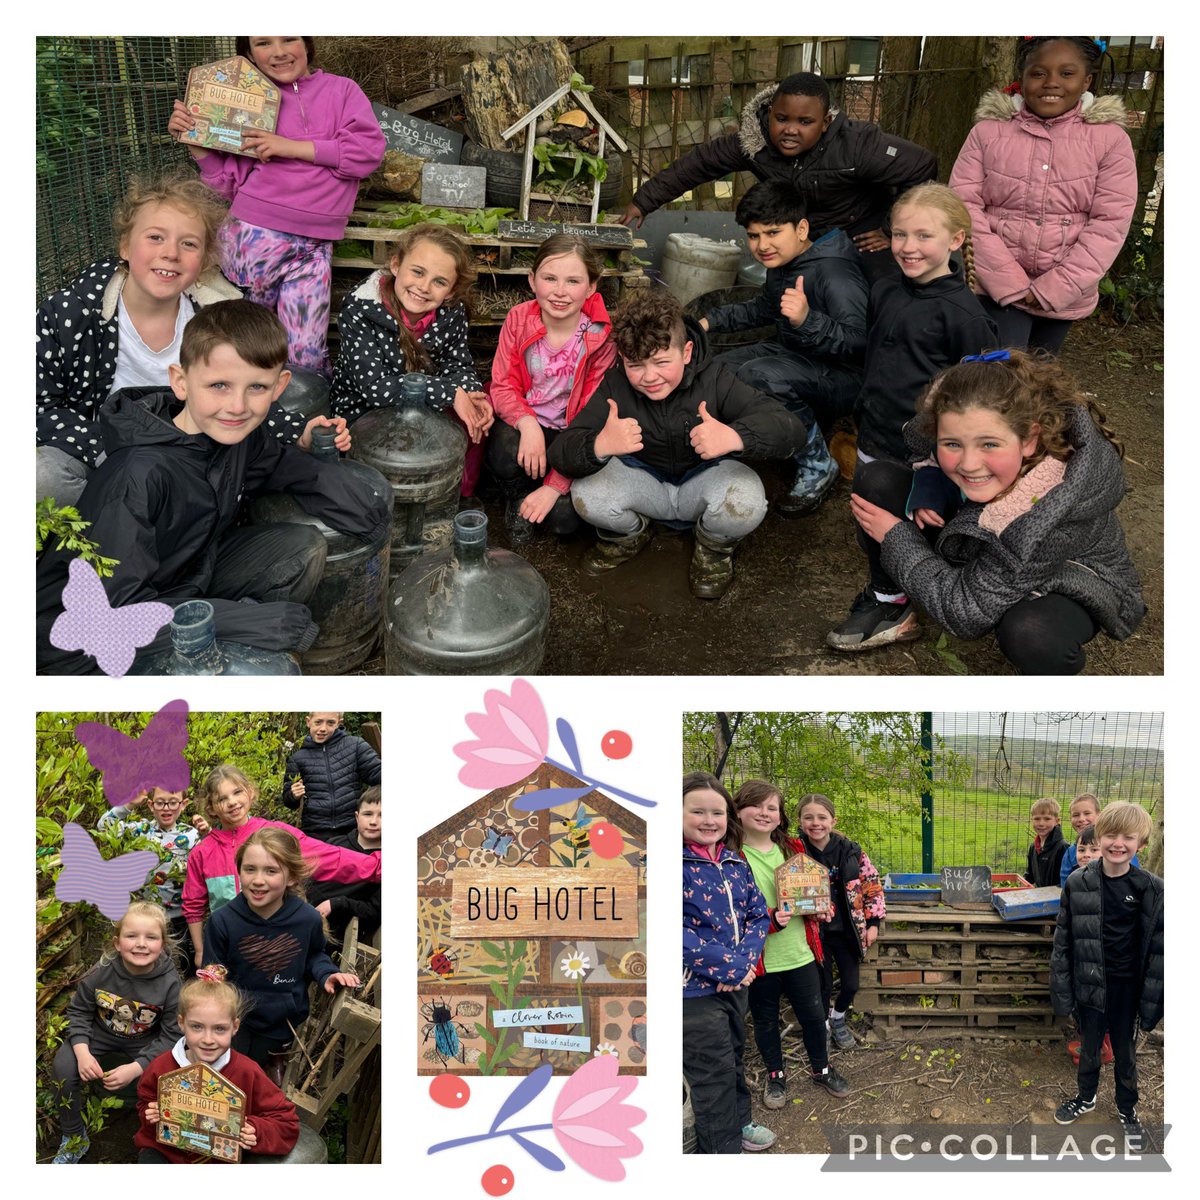 🕷Y4 re-build our multi-storey minibeast mansions to treat our guests to some 5-star lodging. We have also read “Bug Hotel” by Libby Walden illustrated by Clover Robin and had popcorn over the campfire. Lovely afternoon indeed.🪲#forestschool #year4 #bughotel #Science